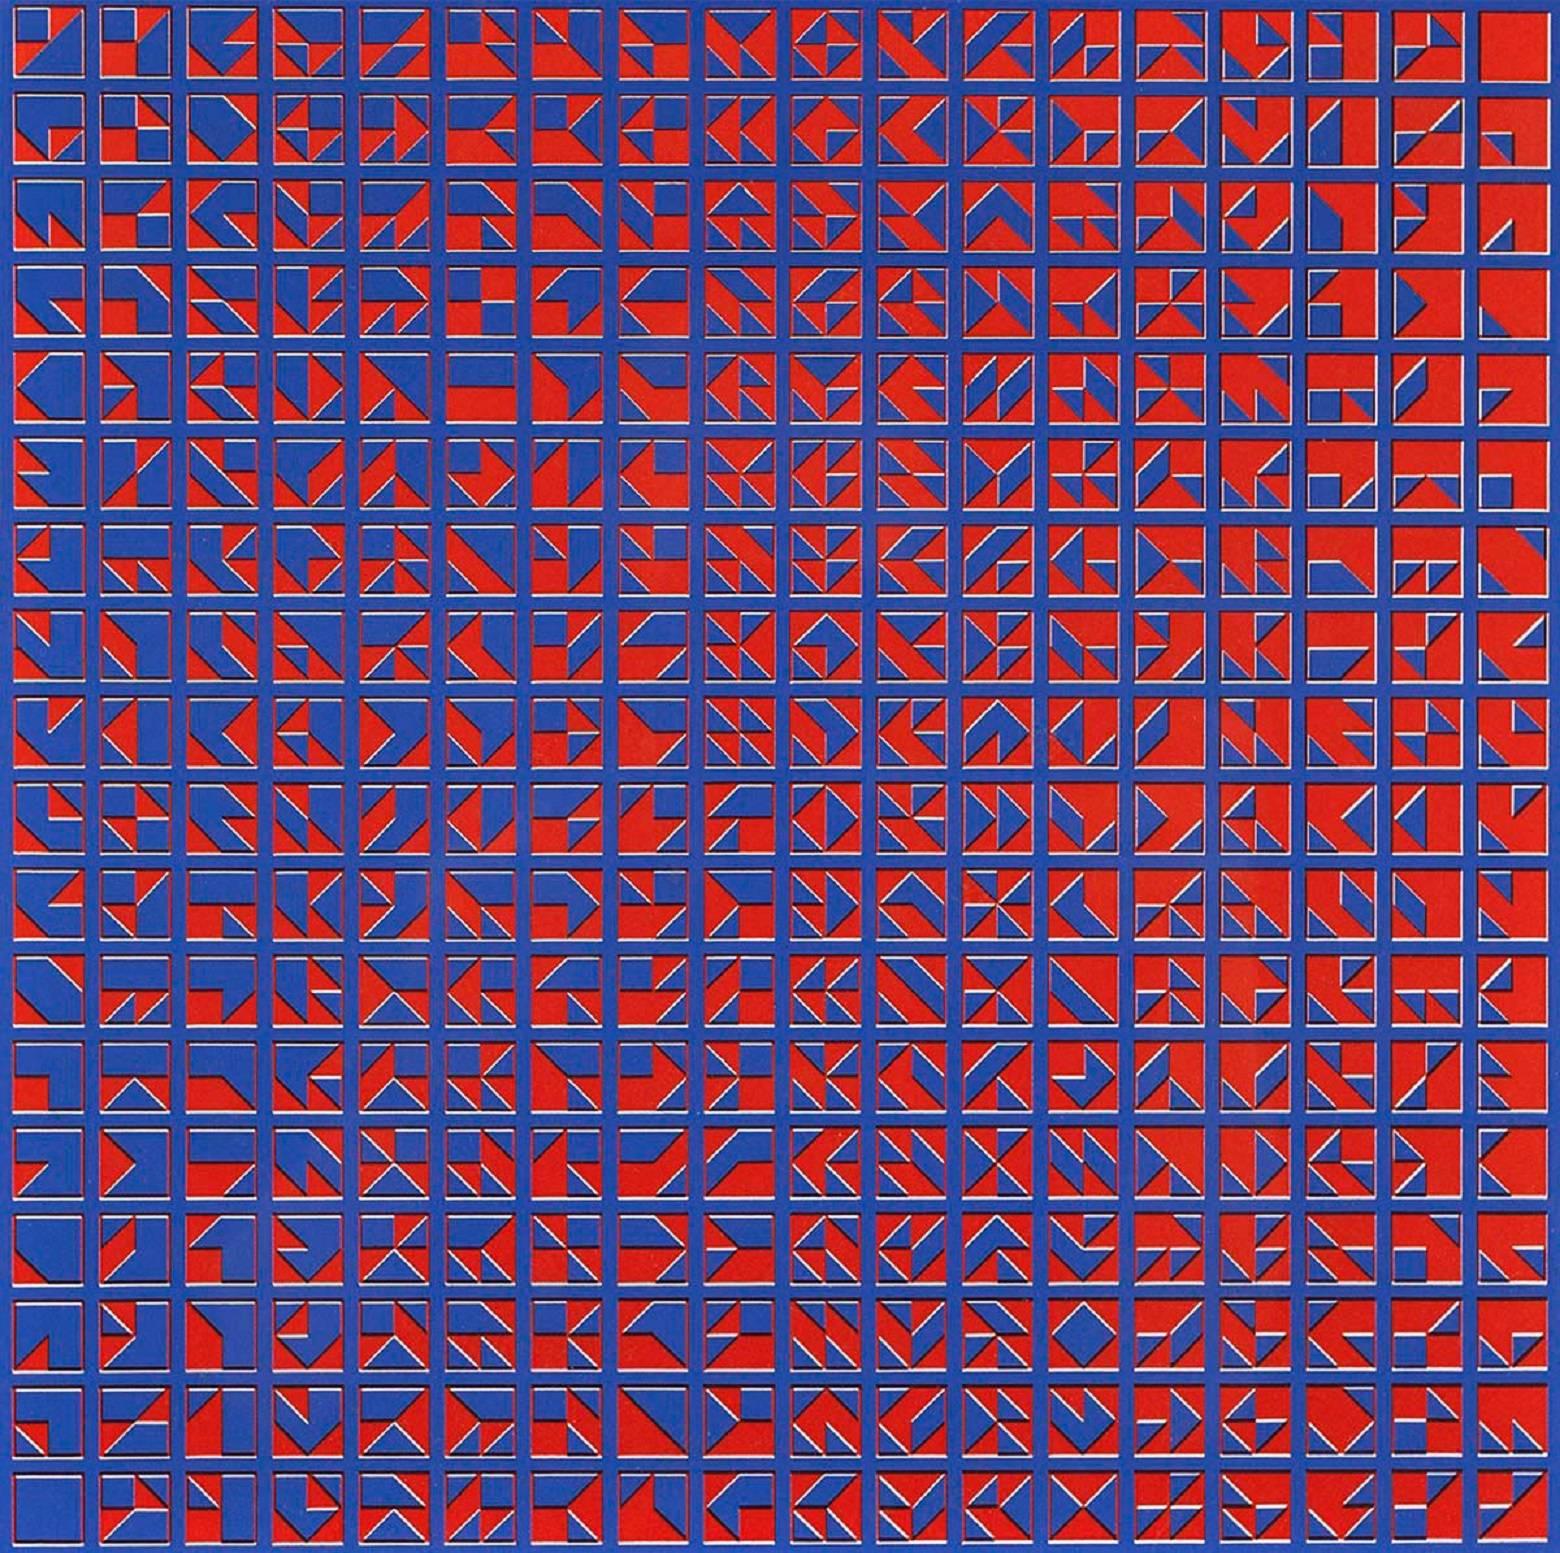 Square Variables VII - Print by Todd Smith